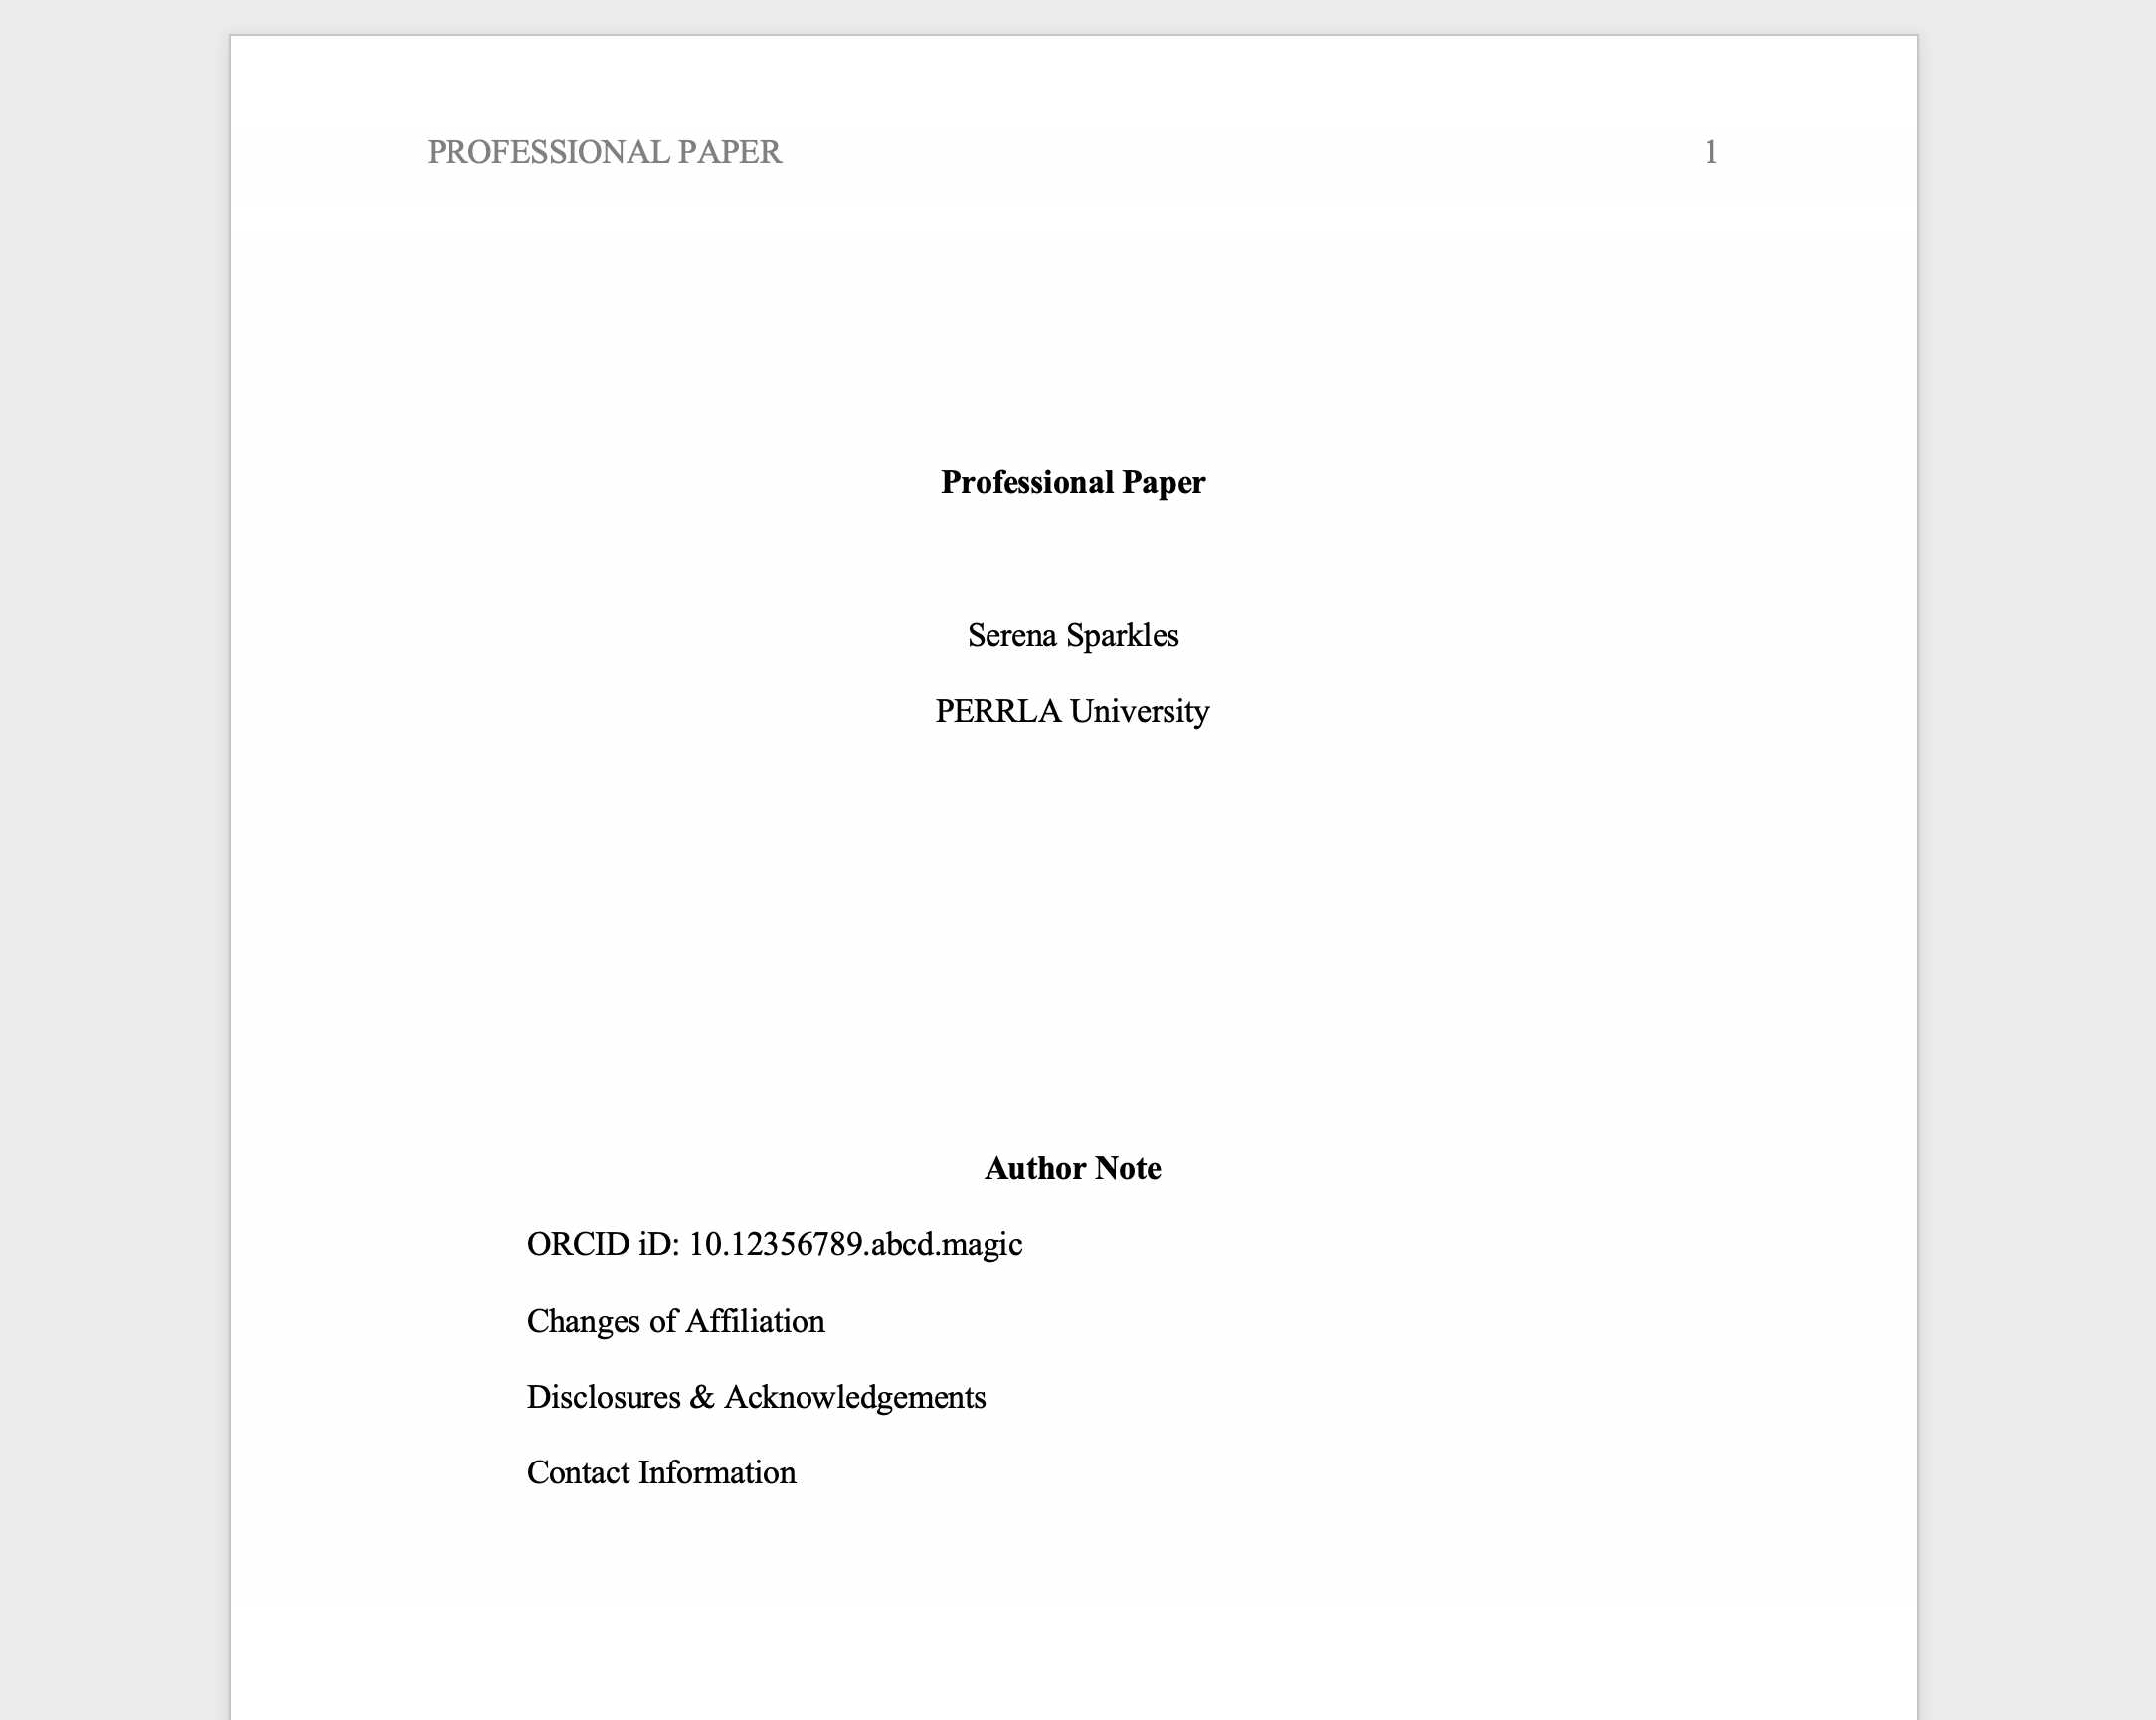 apa 7th edition research paper title page